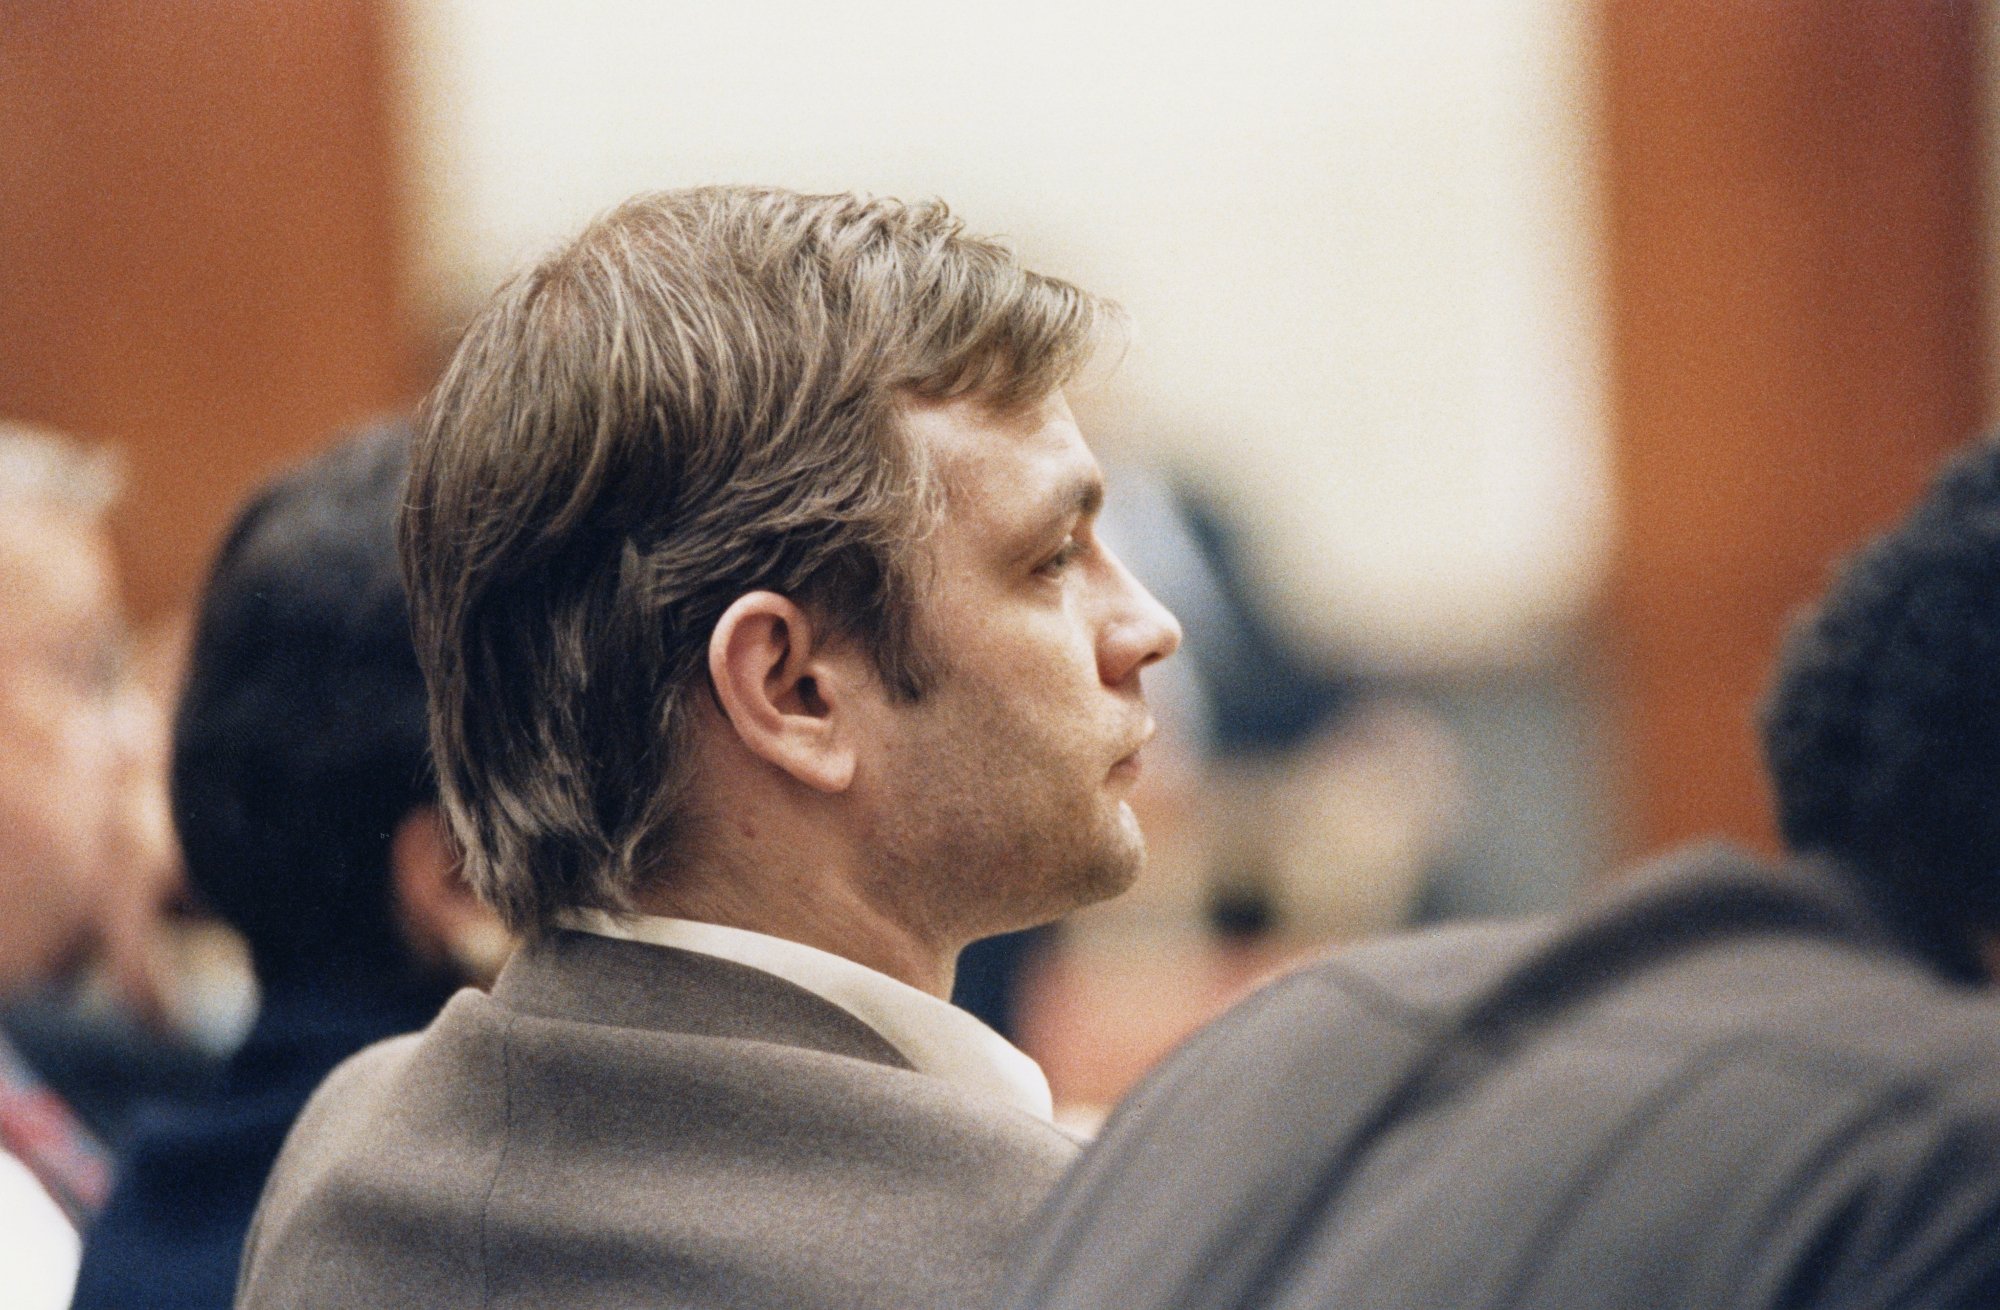 Jeffrey Dahmer Victims’ Families Fought Over Whether to Auction off His Death Tools 